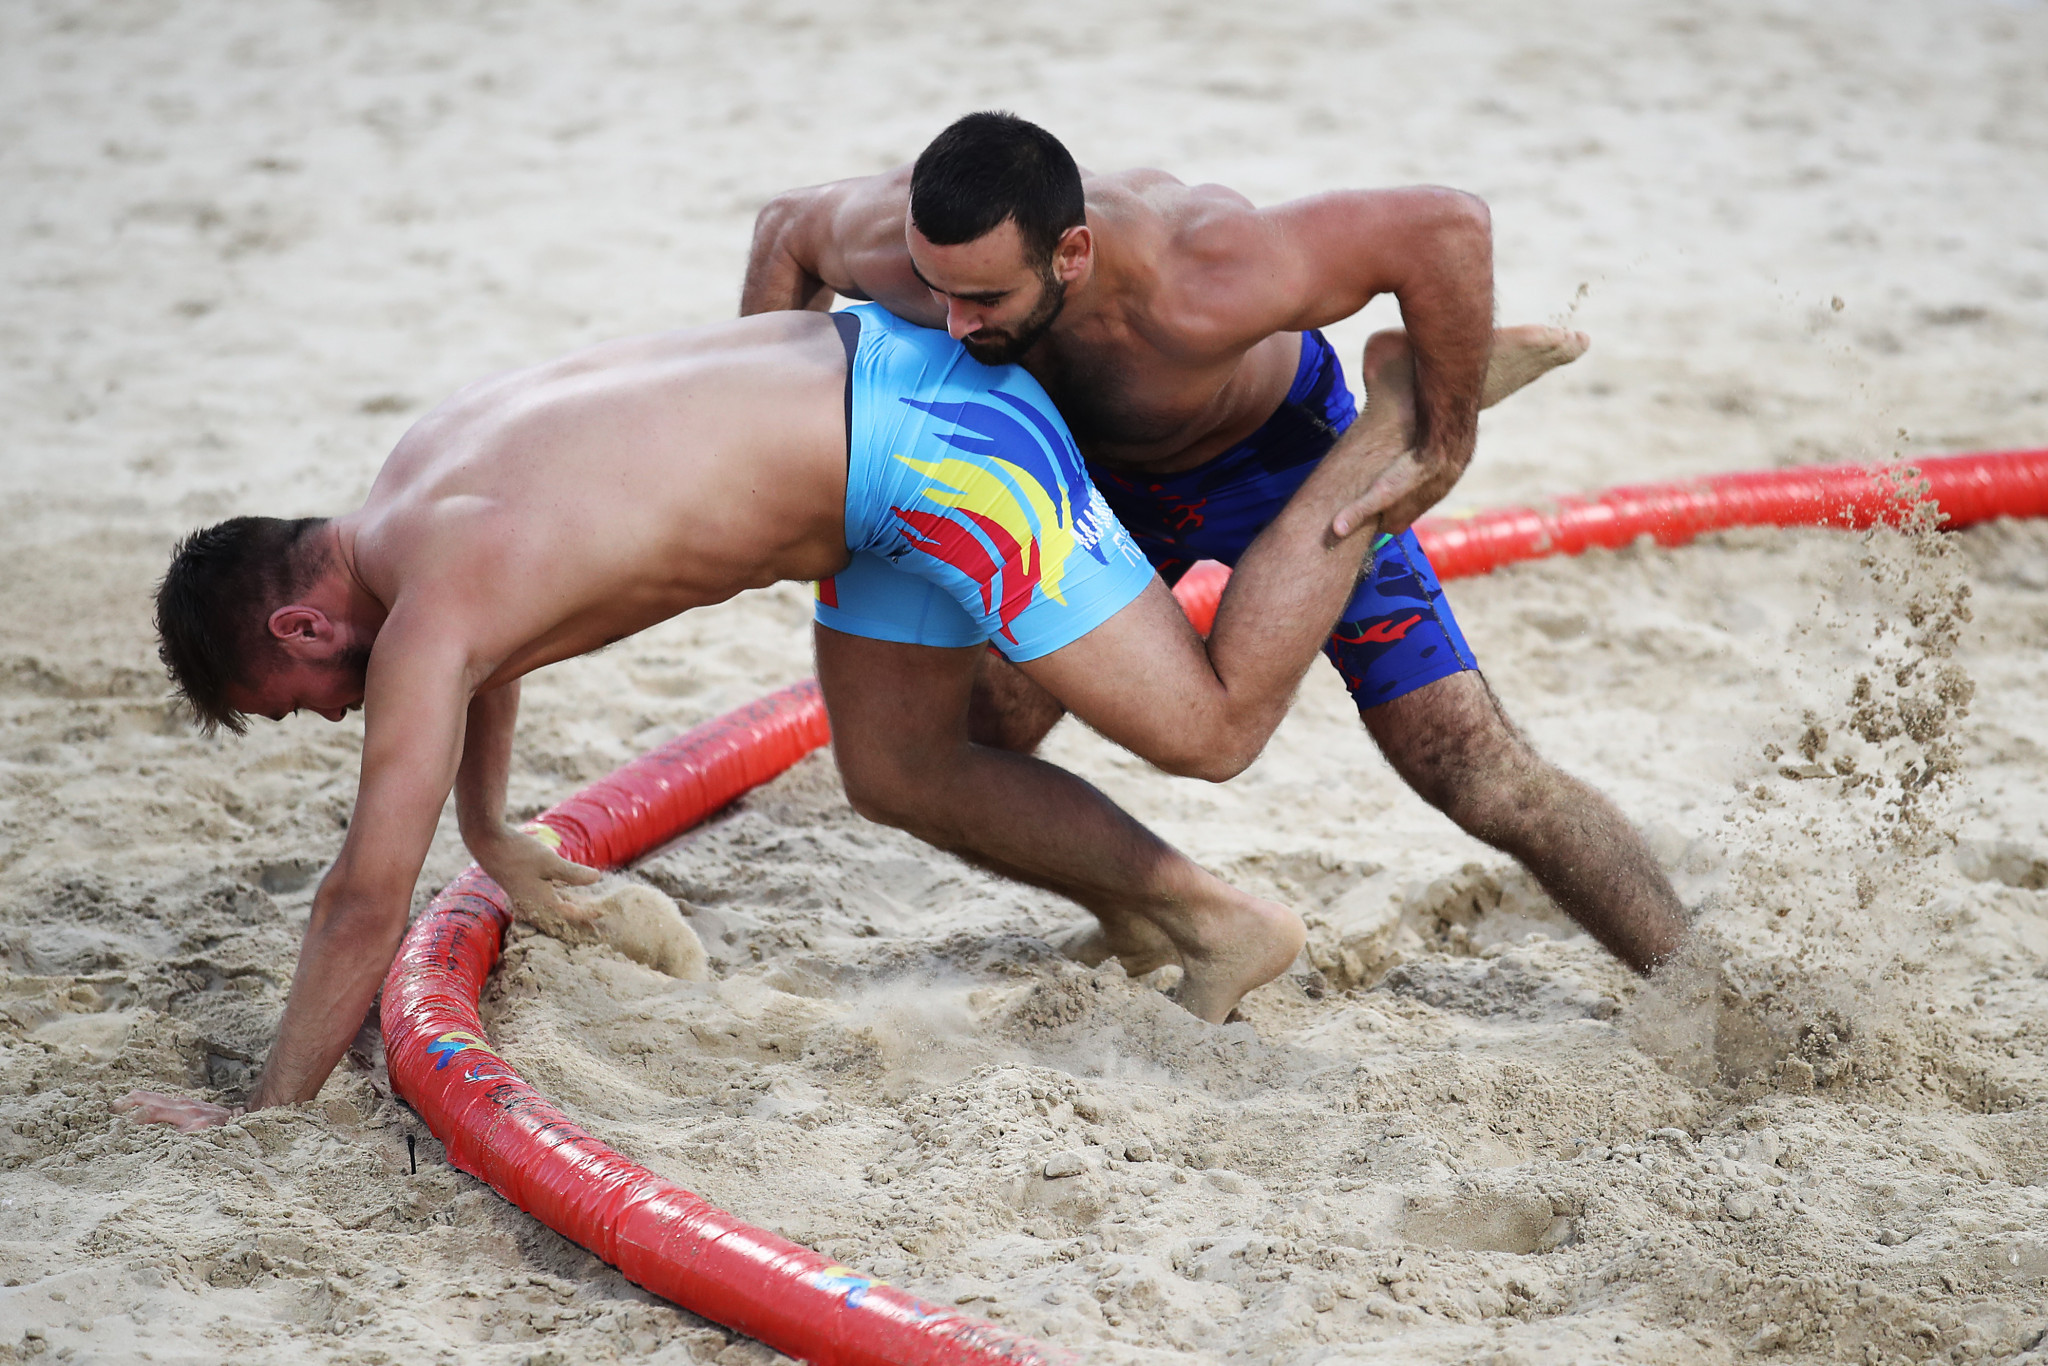 Beach Wrestling World Series set to make Italian debut in Rome in season's second event